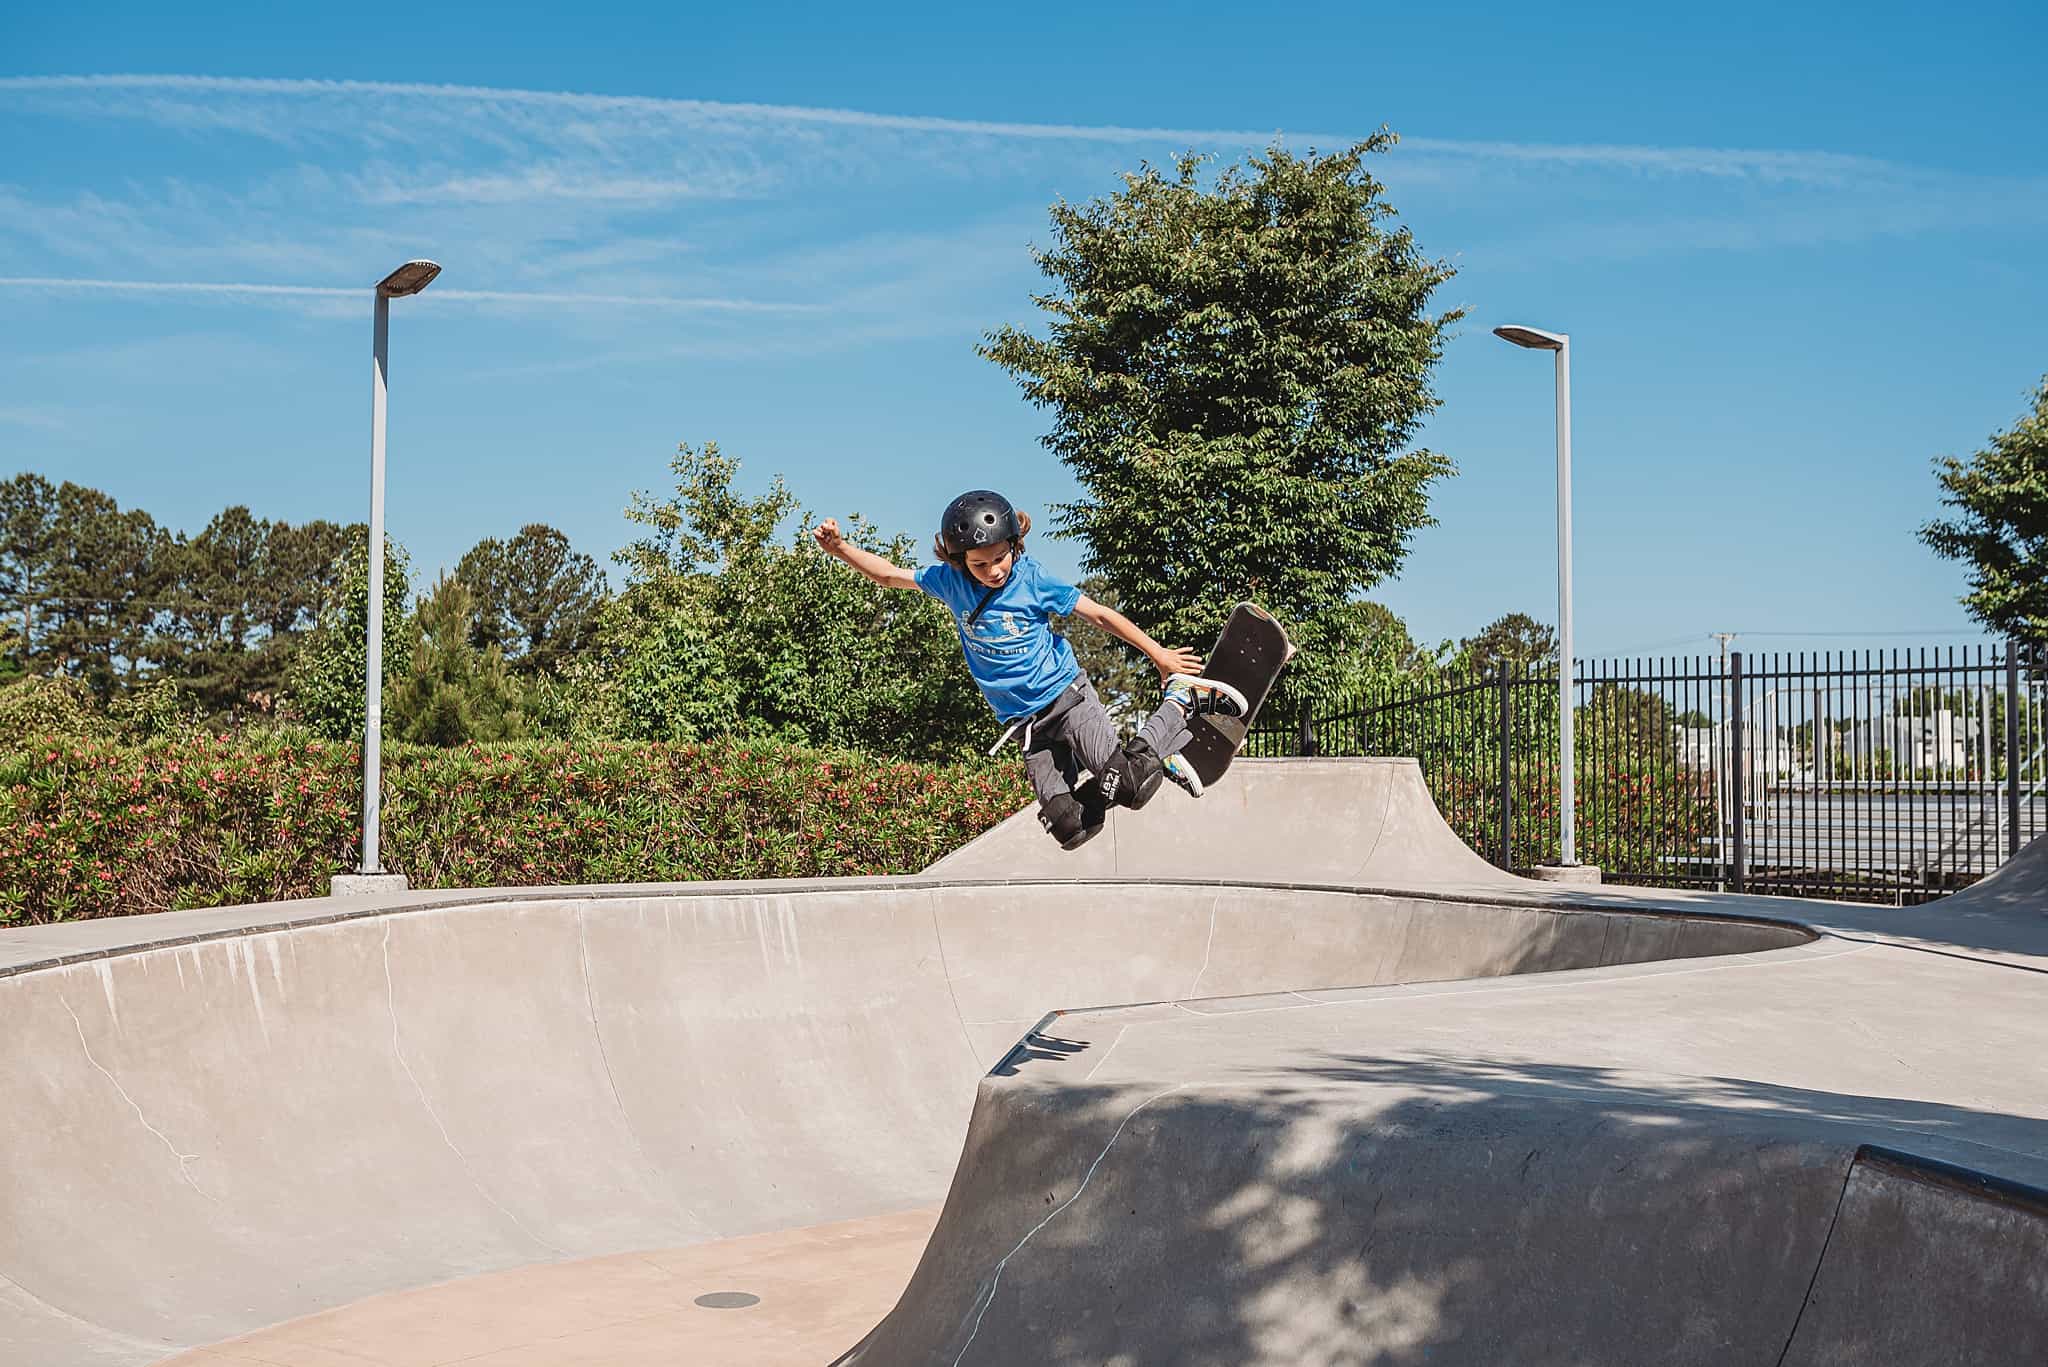 how to skateboard with kids